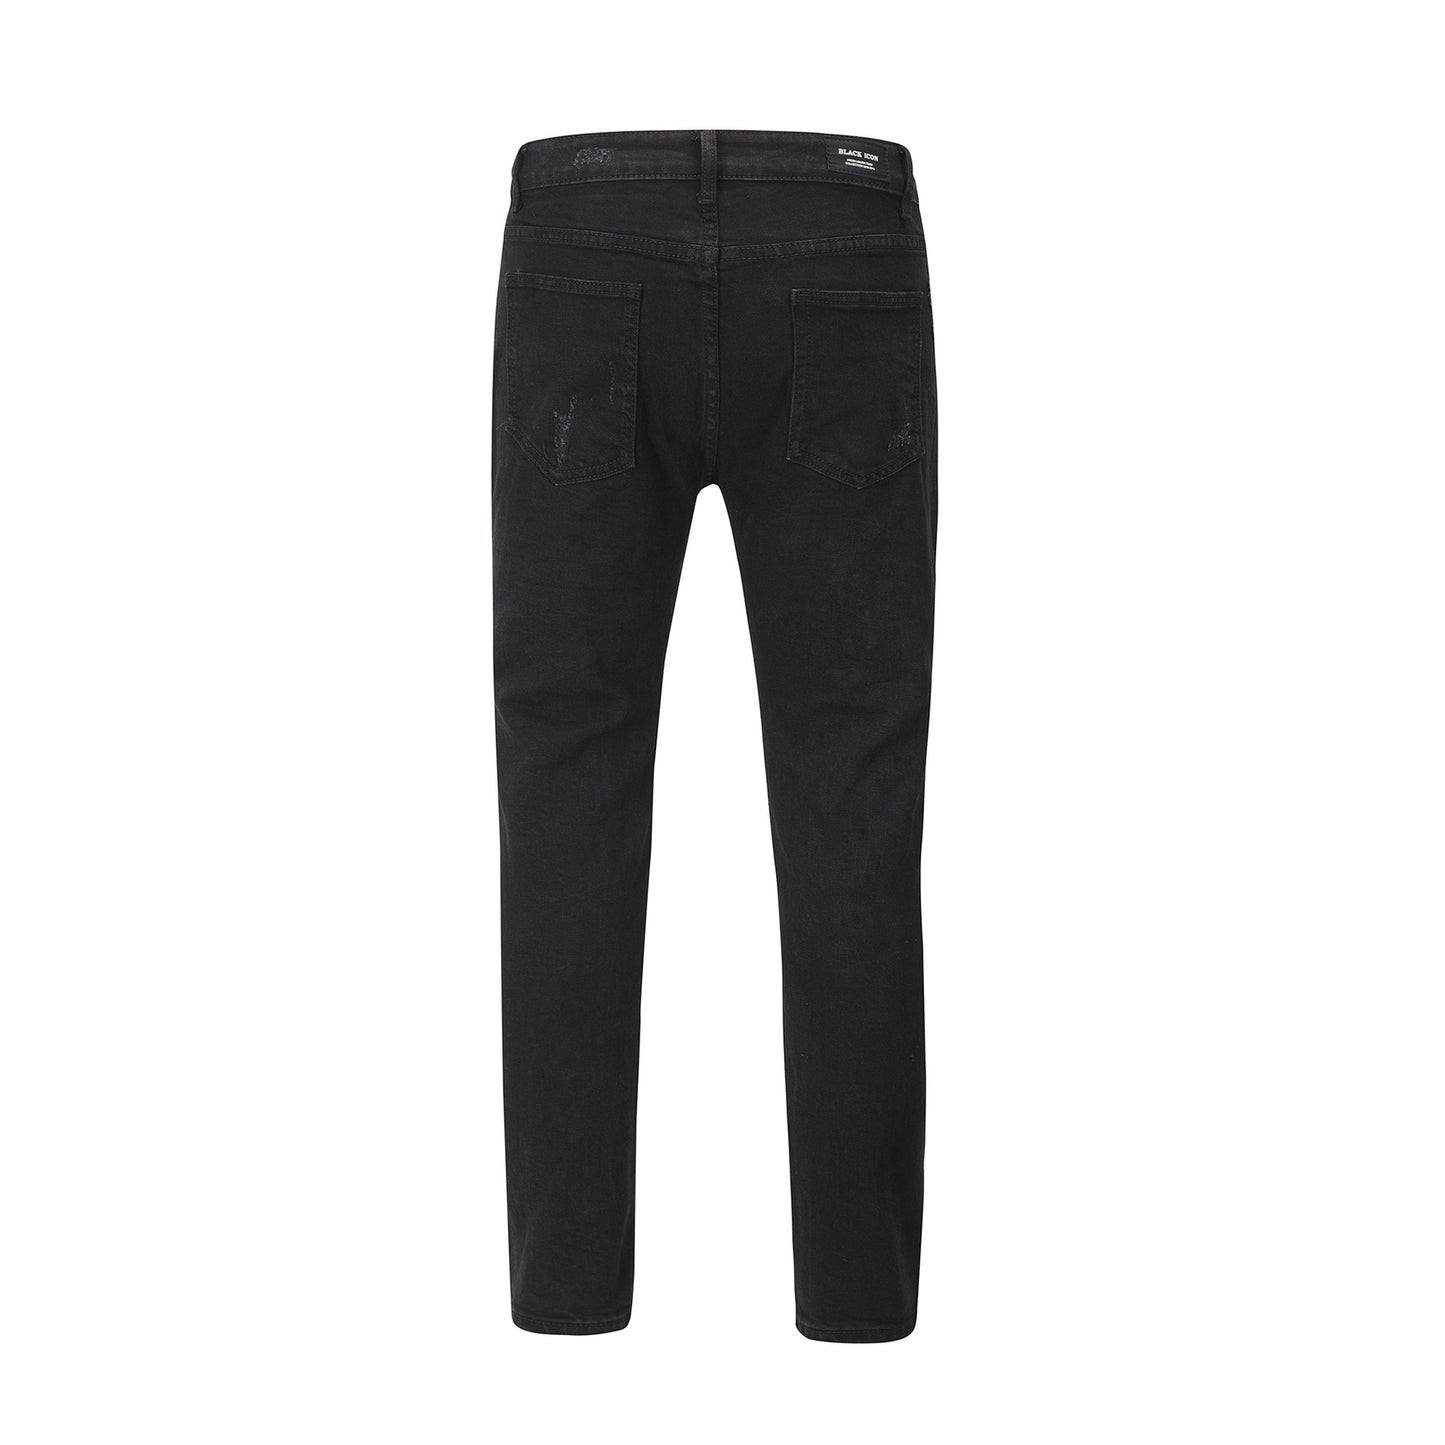 Black Ripped Stretch Jeans Slim Fit Casual Trousers